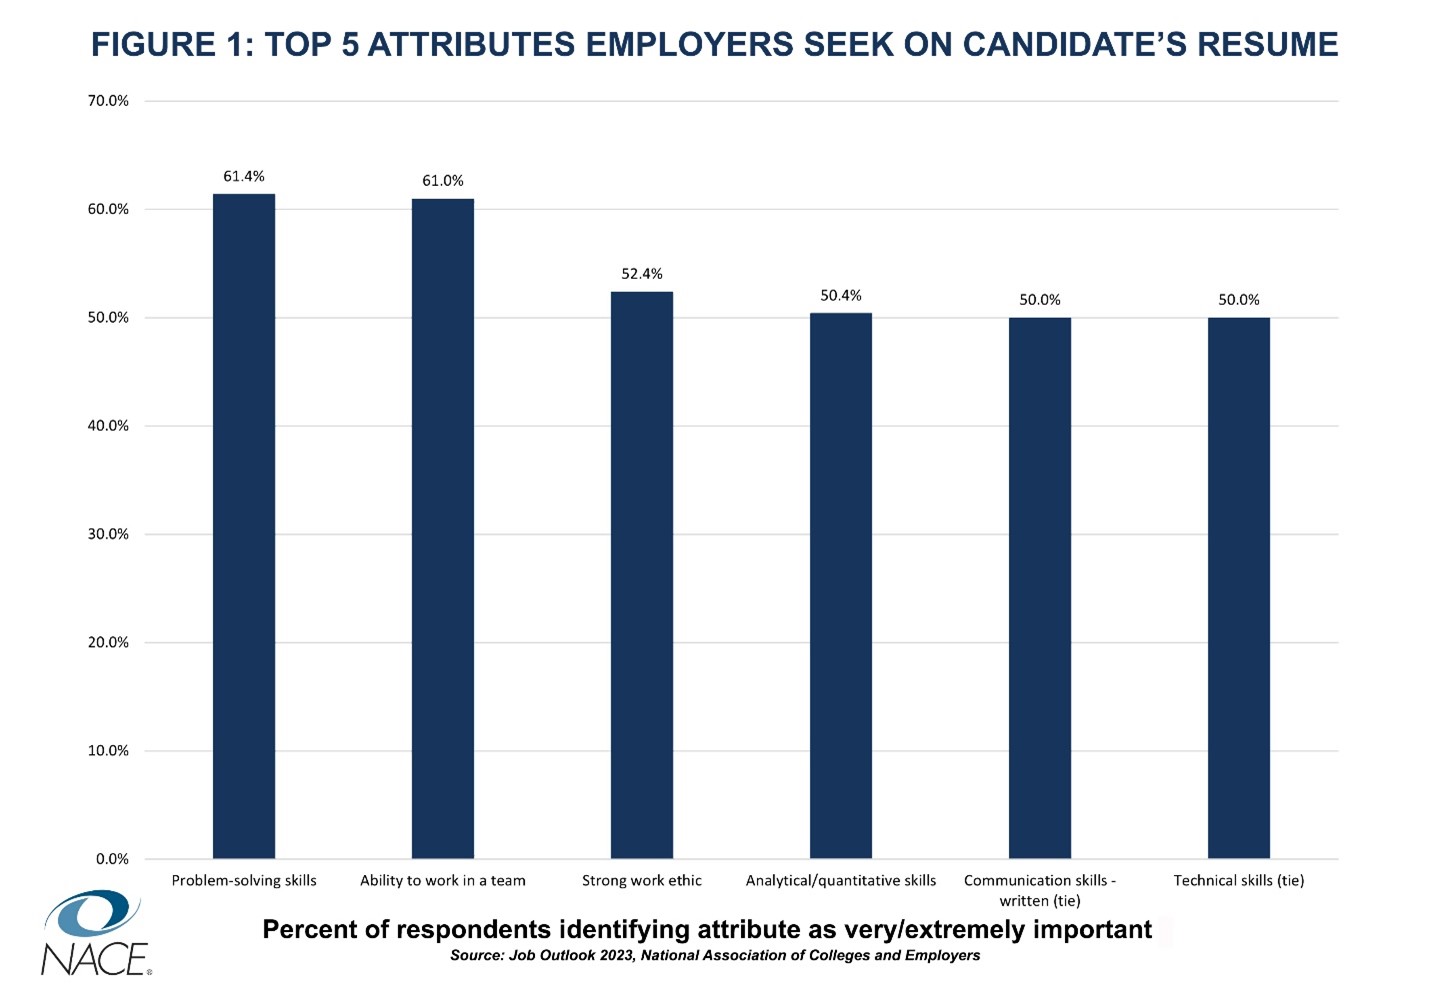 Percentage of respondents identifying attribute as very/extremely important